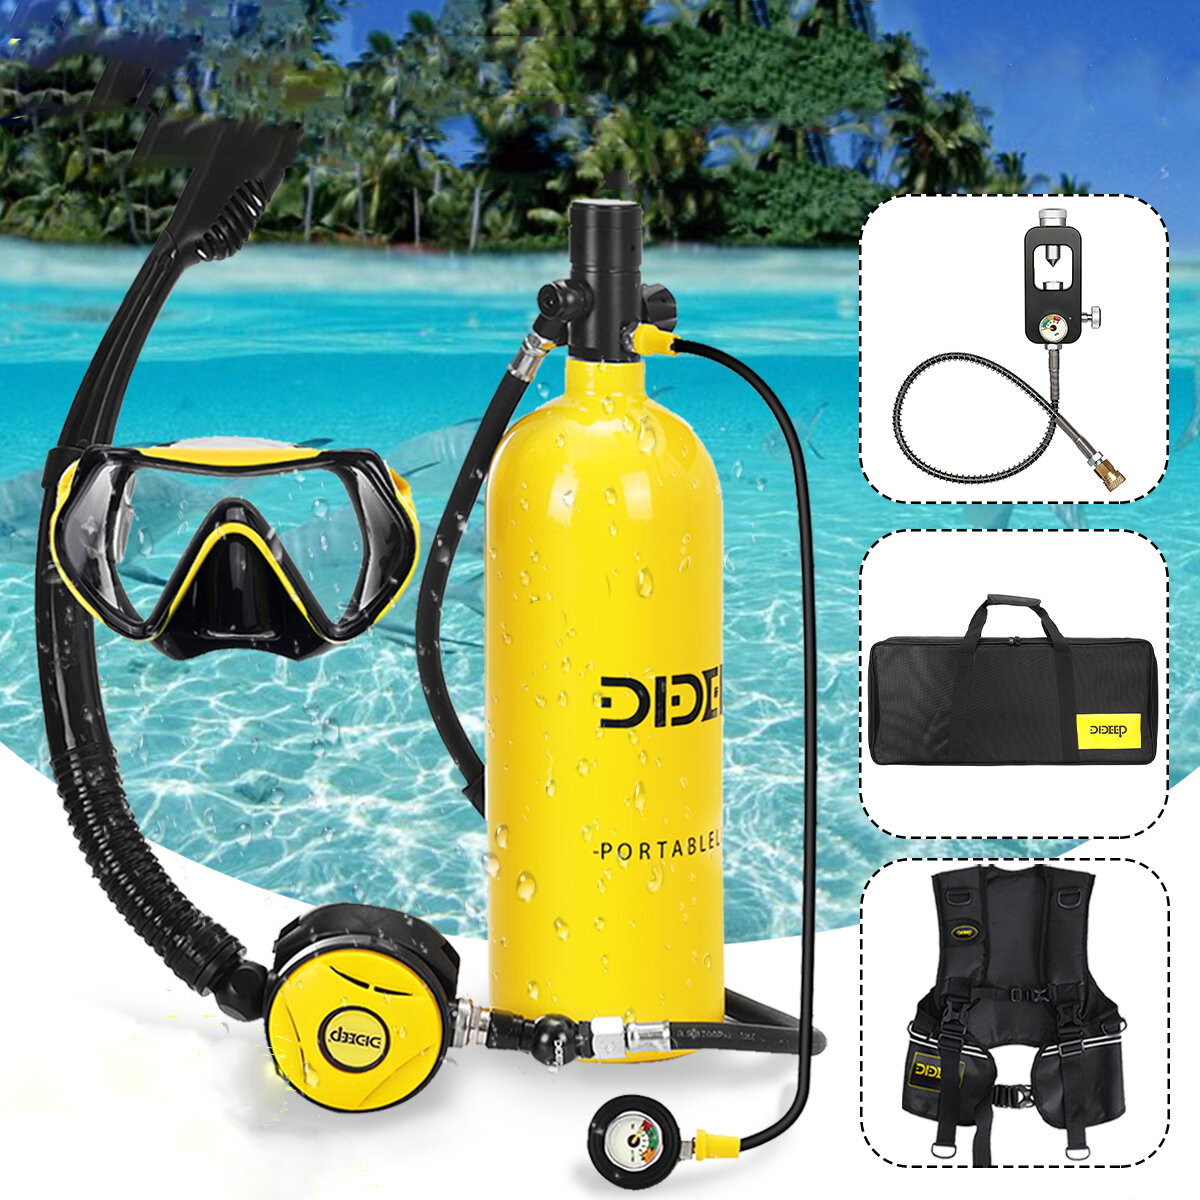 DIDEEP X5000 Plus+ 2L Scuba Diving Tank Air Snorkeling Oxygen Cylinder Underwater Equipment with Vest Bag Adapter Glasse